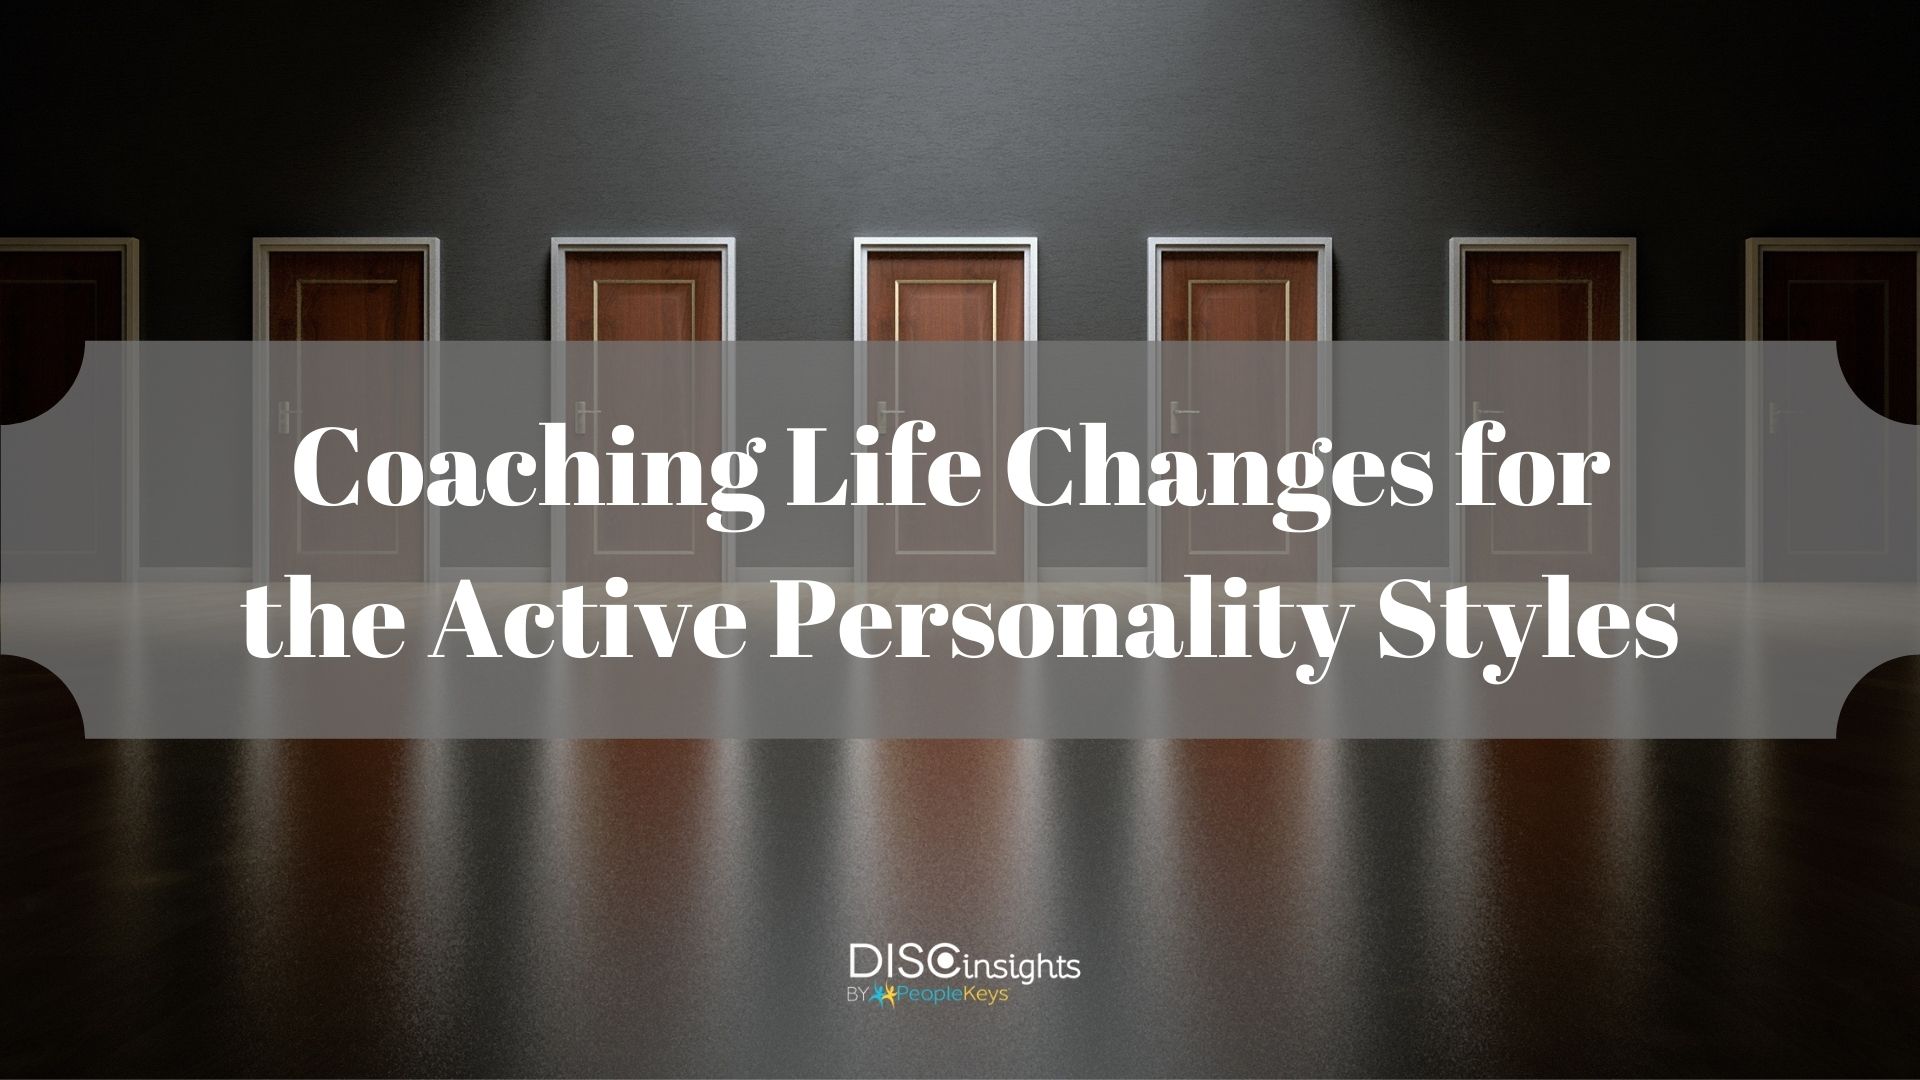 Coaching life changes for the active personality styles